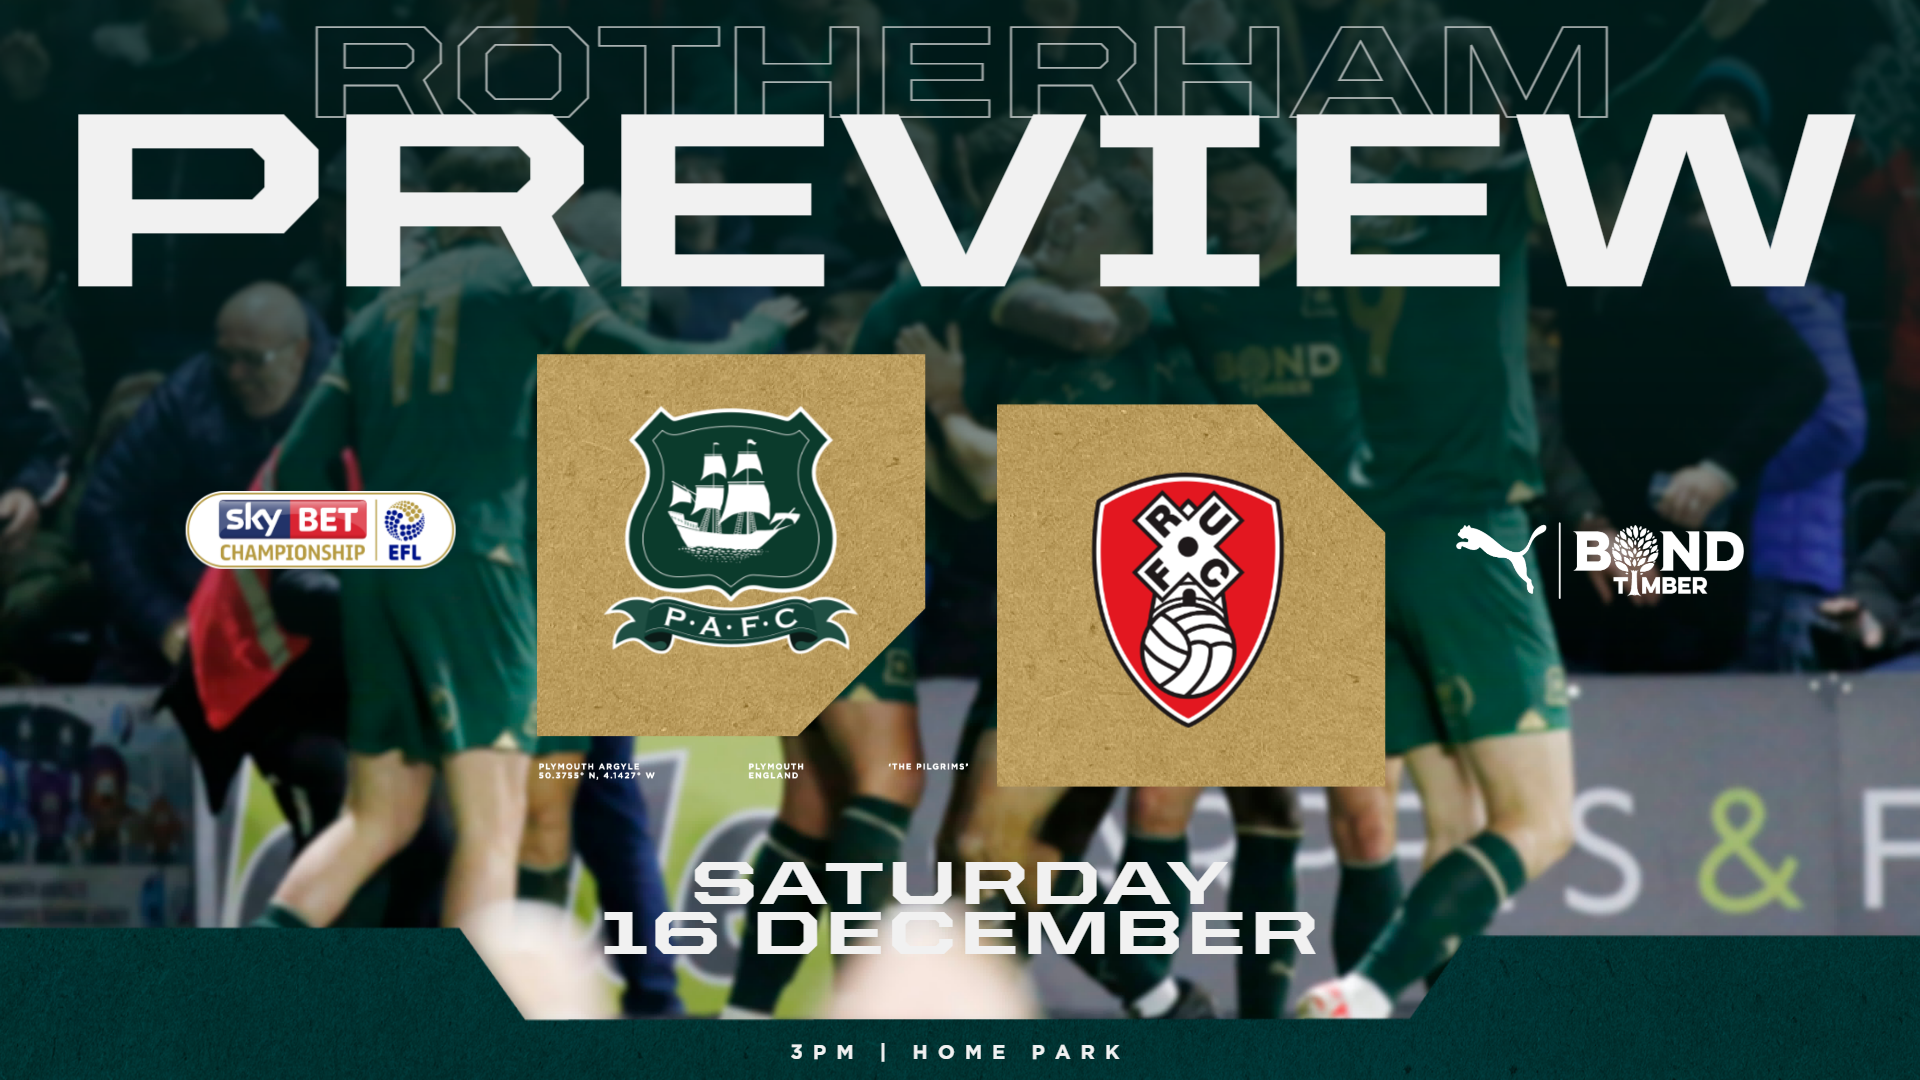 Rotherham Preview